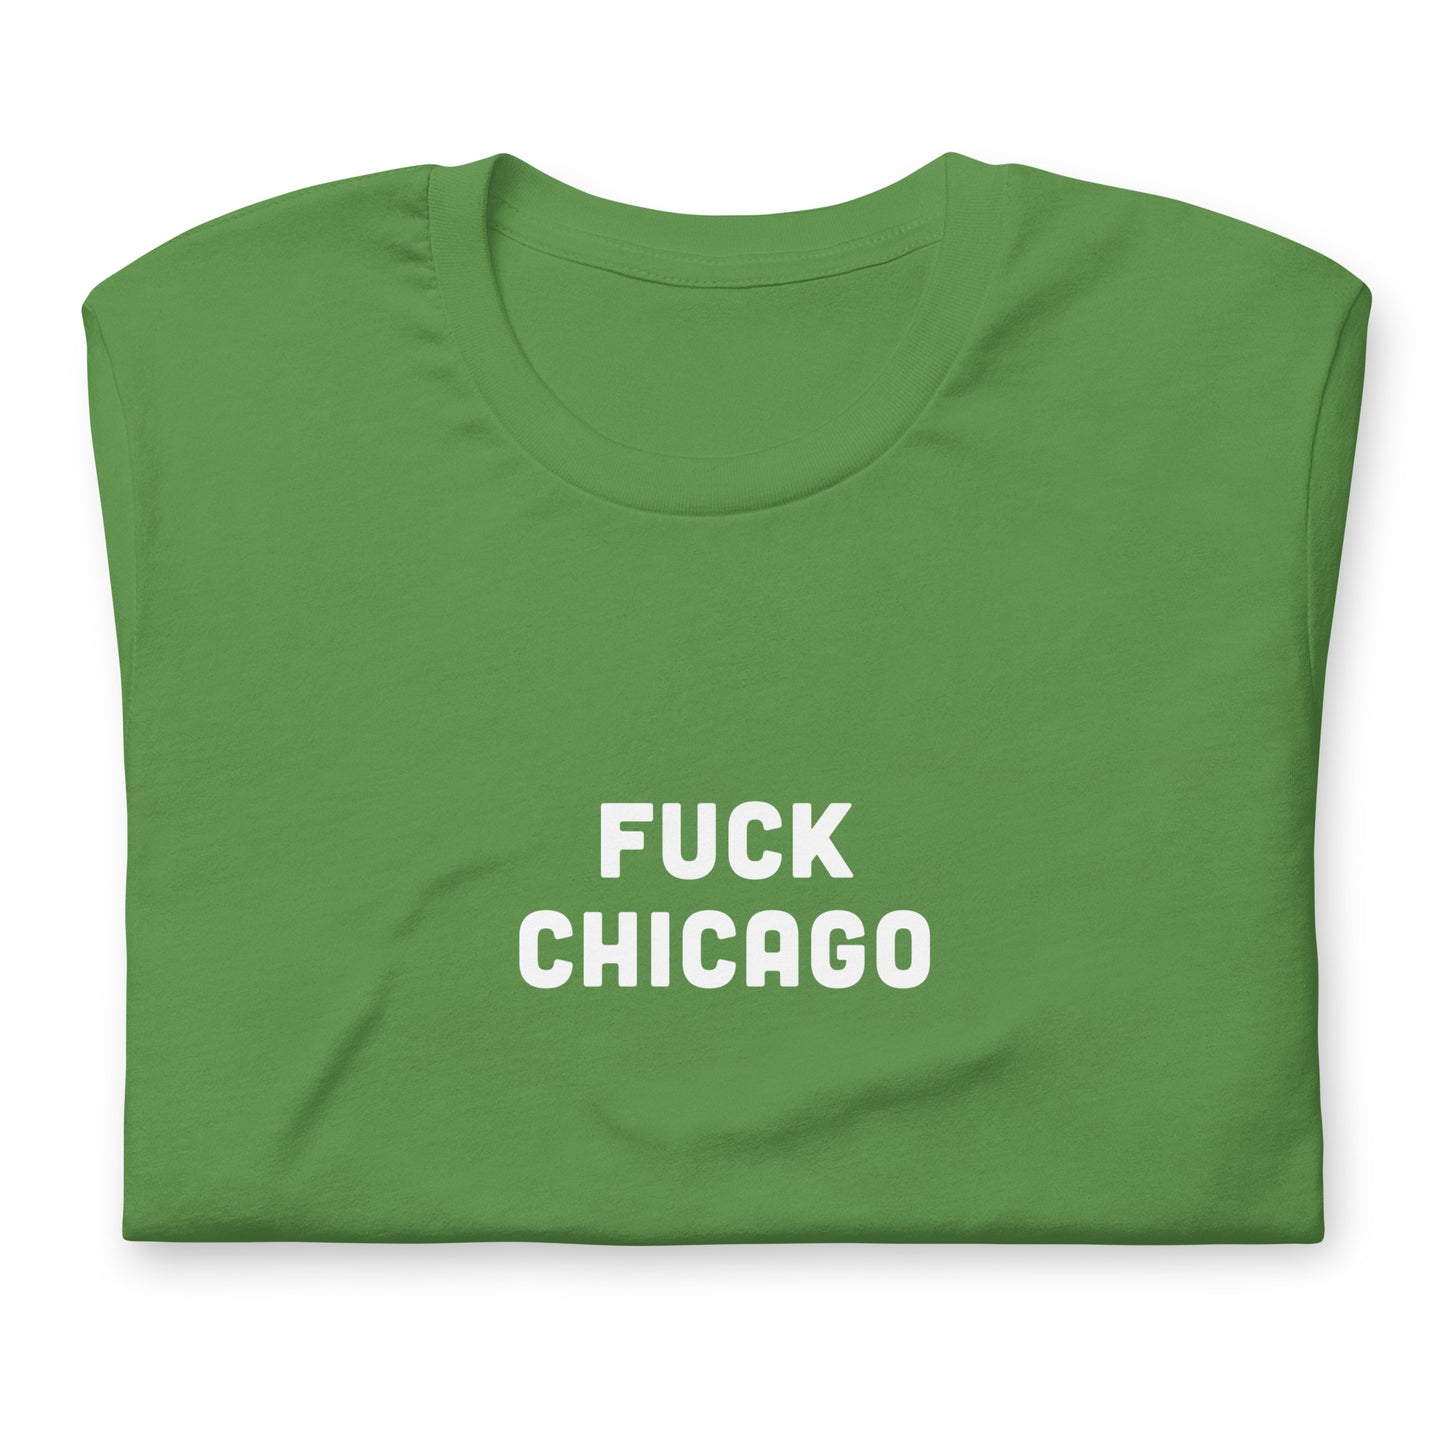 Fuck Chicago T-Shirt Size 2XL Color Navy